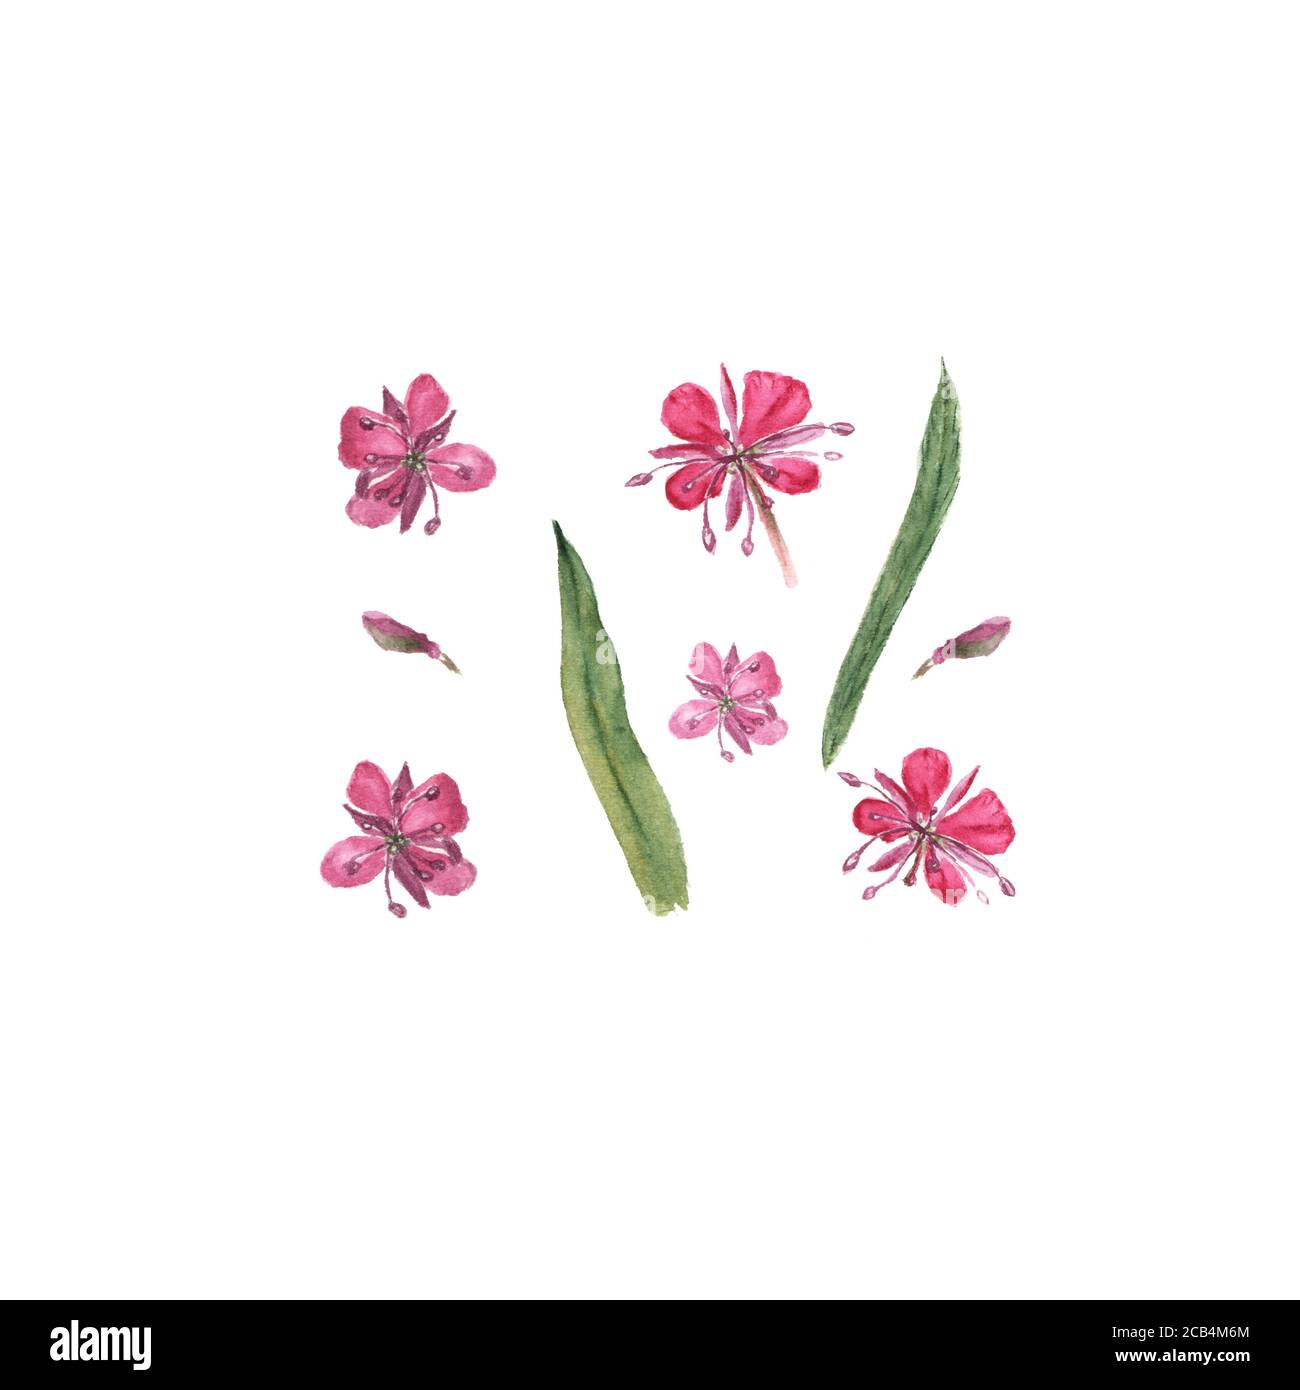 Botanical watercolor illustration of Epilobium, Chamaenerion angustifolium, Willow herb, fireweed flower isolated on white background. Could be used a Stock Photo